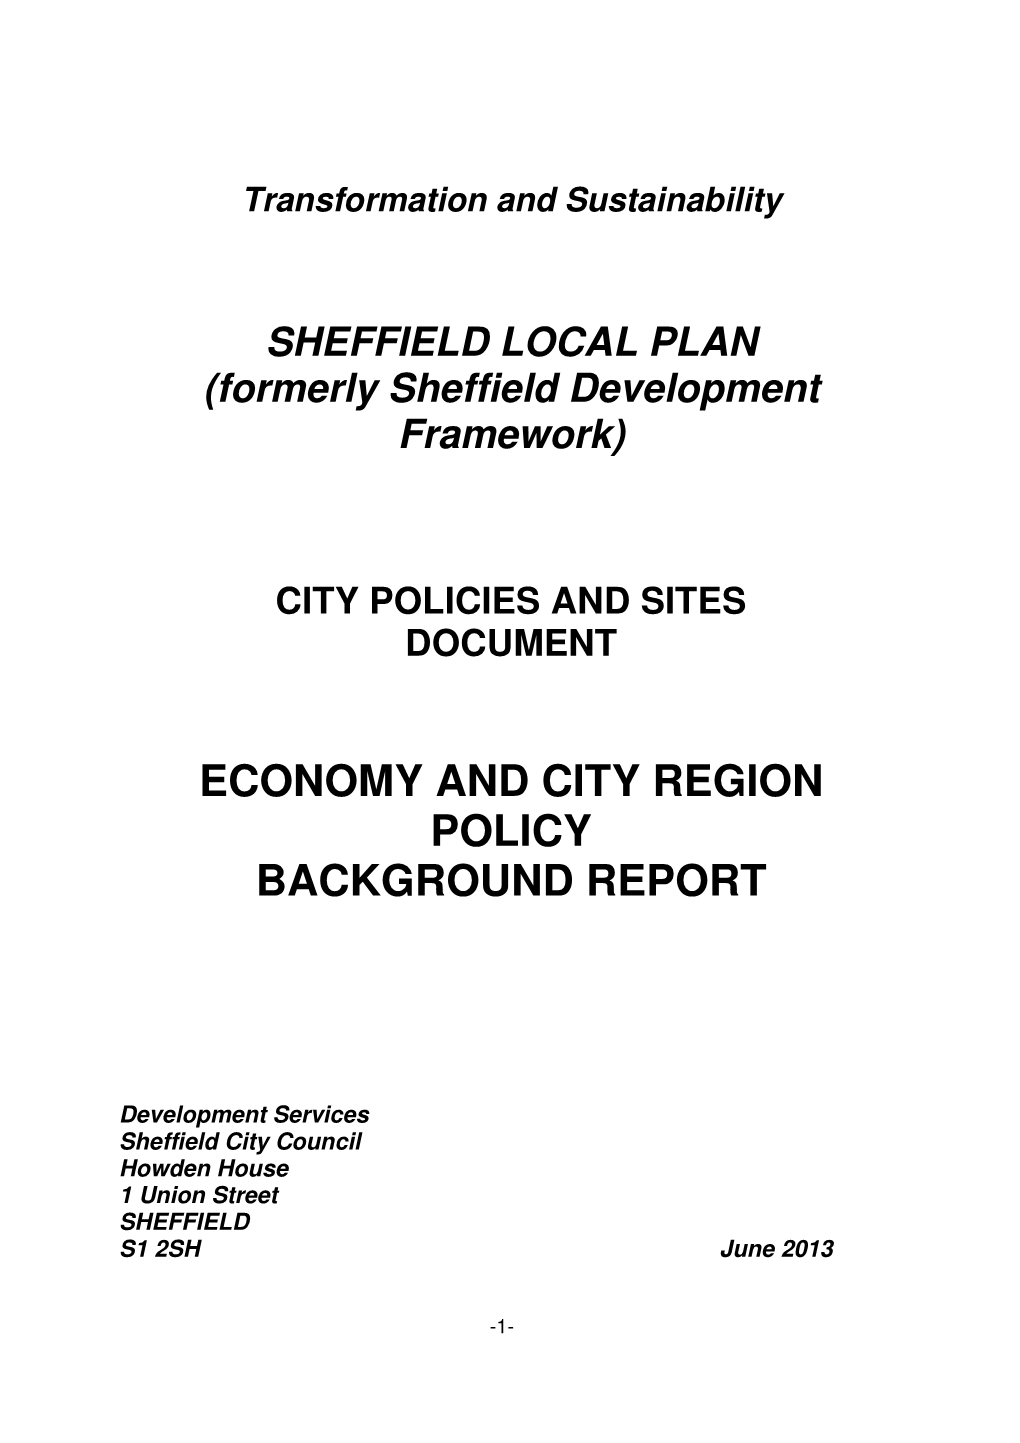 Economy and City Region Policy Background Report